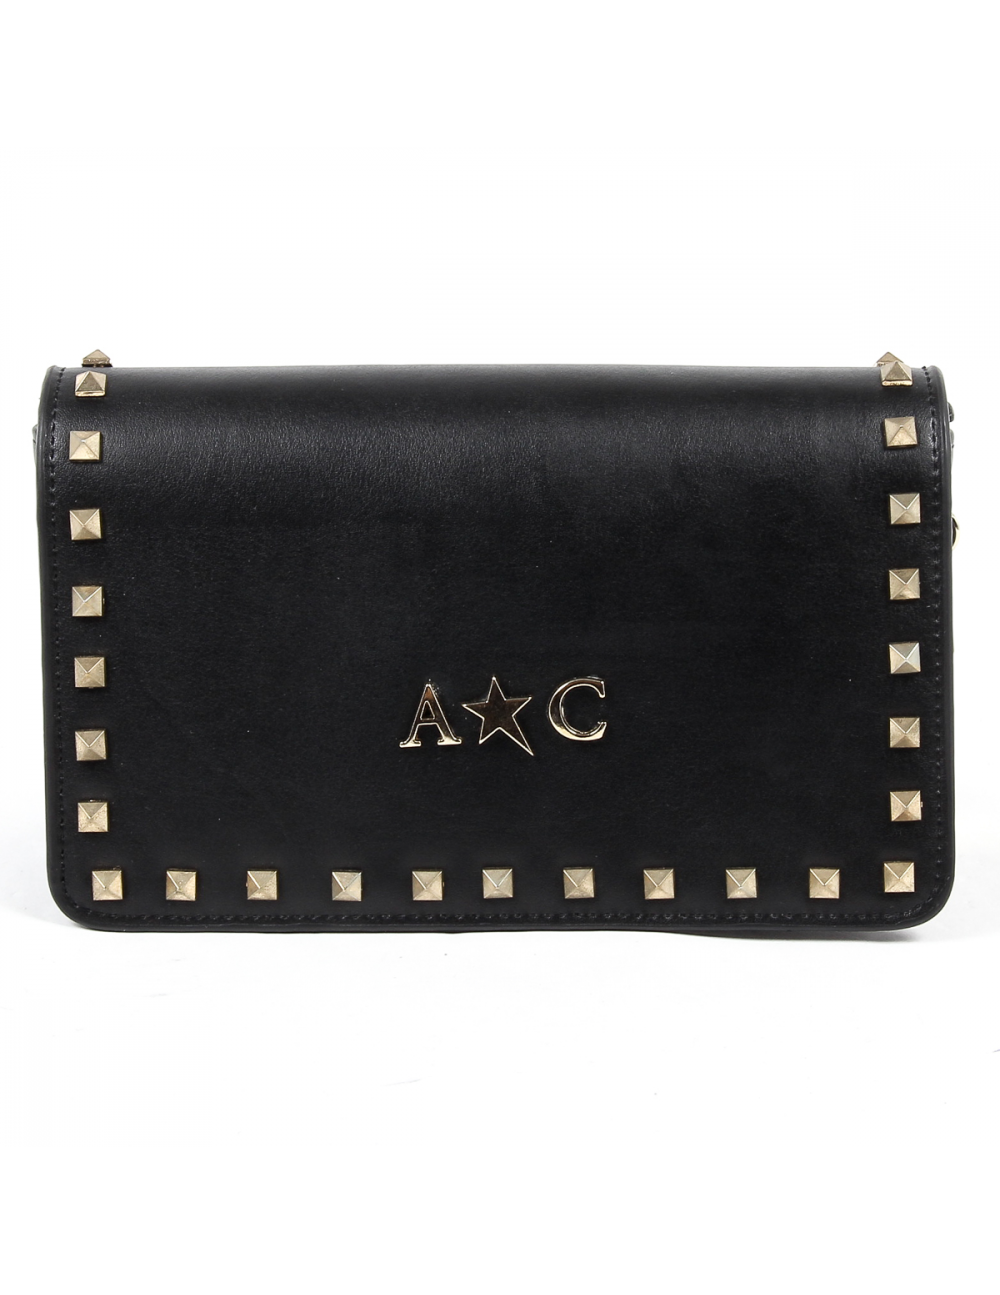 Andrew Charles Womens Handbag Black PAIGE - YuppyCollections